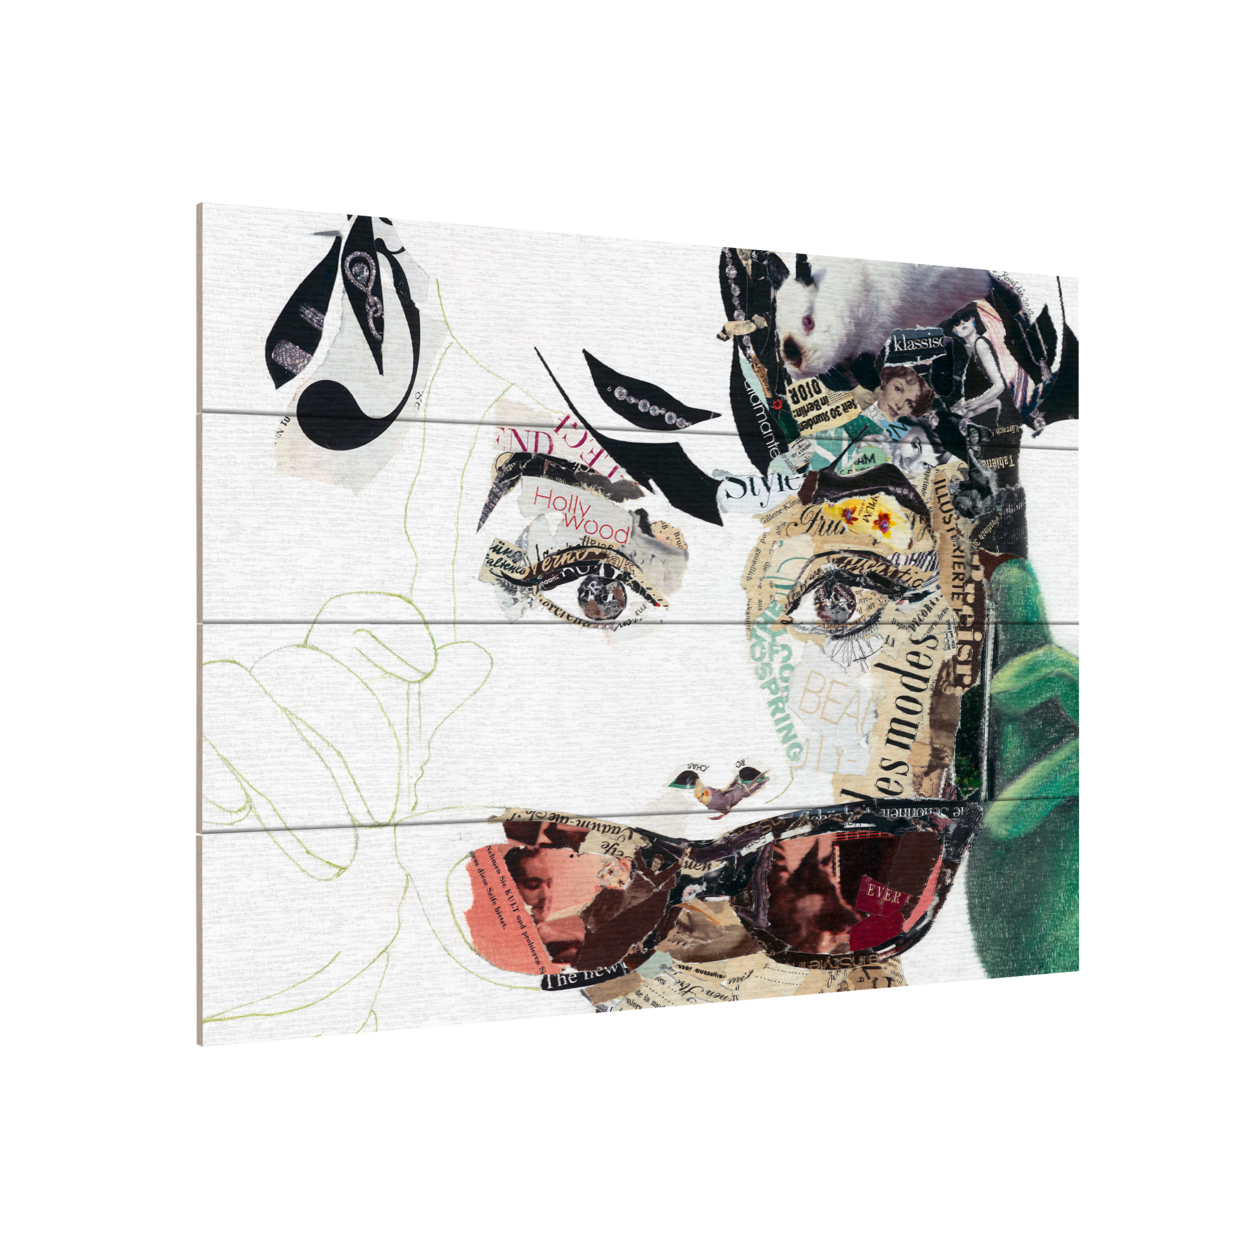 Wall Art 12 X 16 Inches Titled Audrey Ready To Hang Printed On Wooden Planks